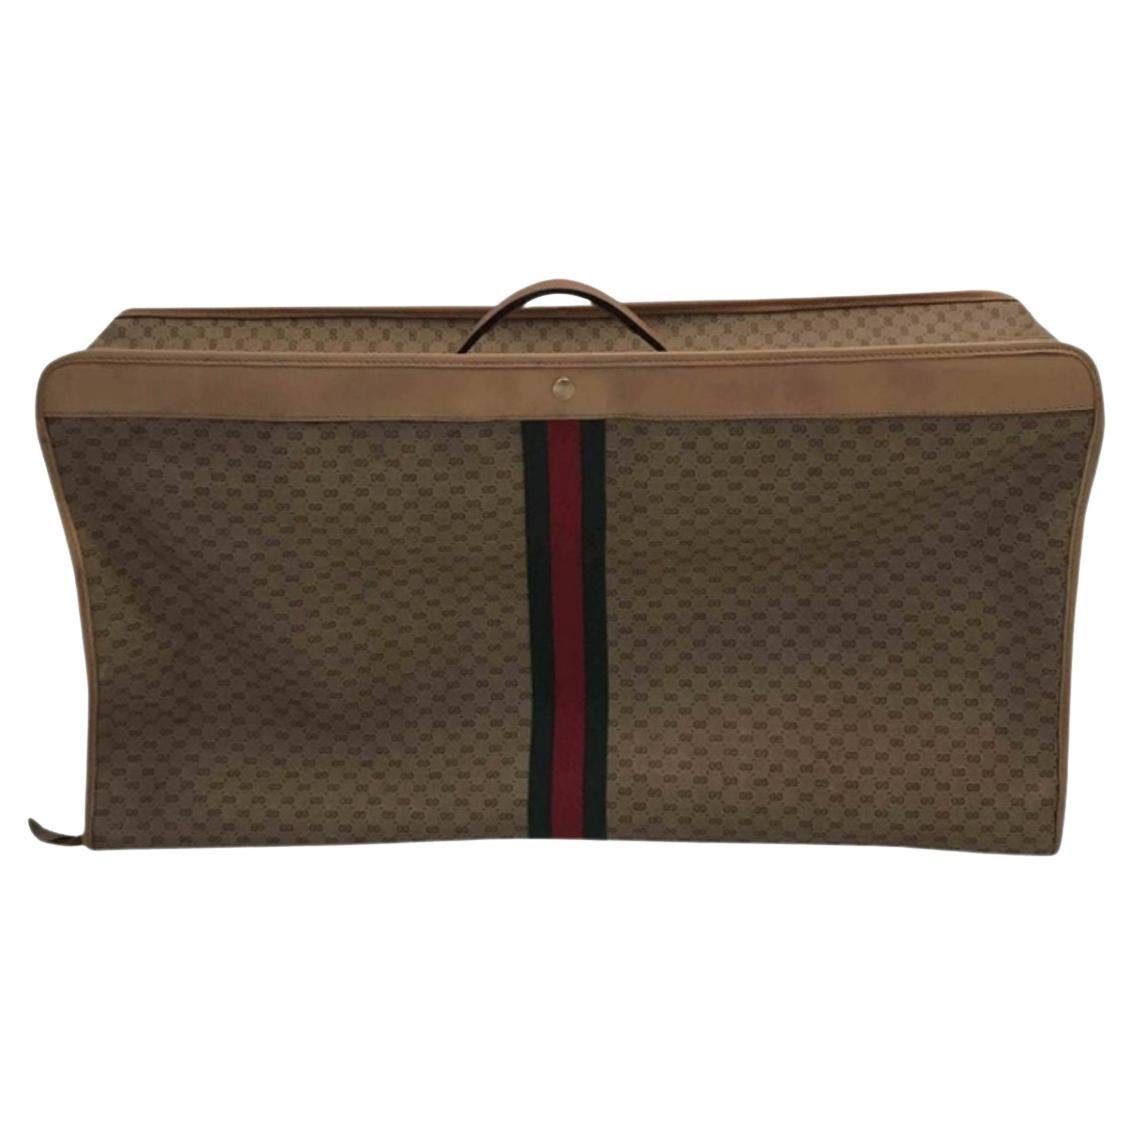 Gucci vintage collectible suitcase. For Sale